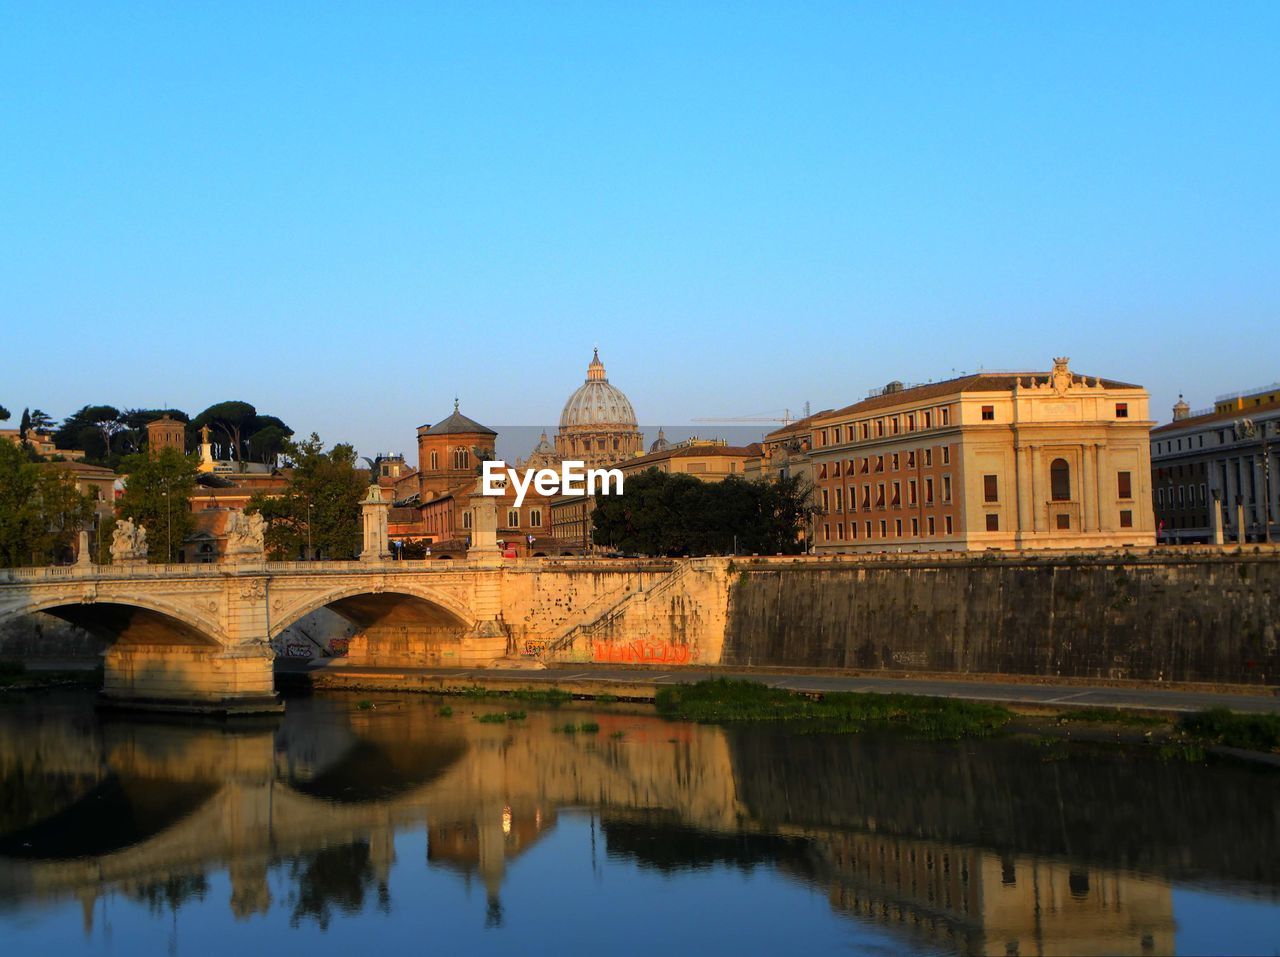 Bridge over river by st peter basilica against clear blue sky in city